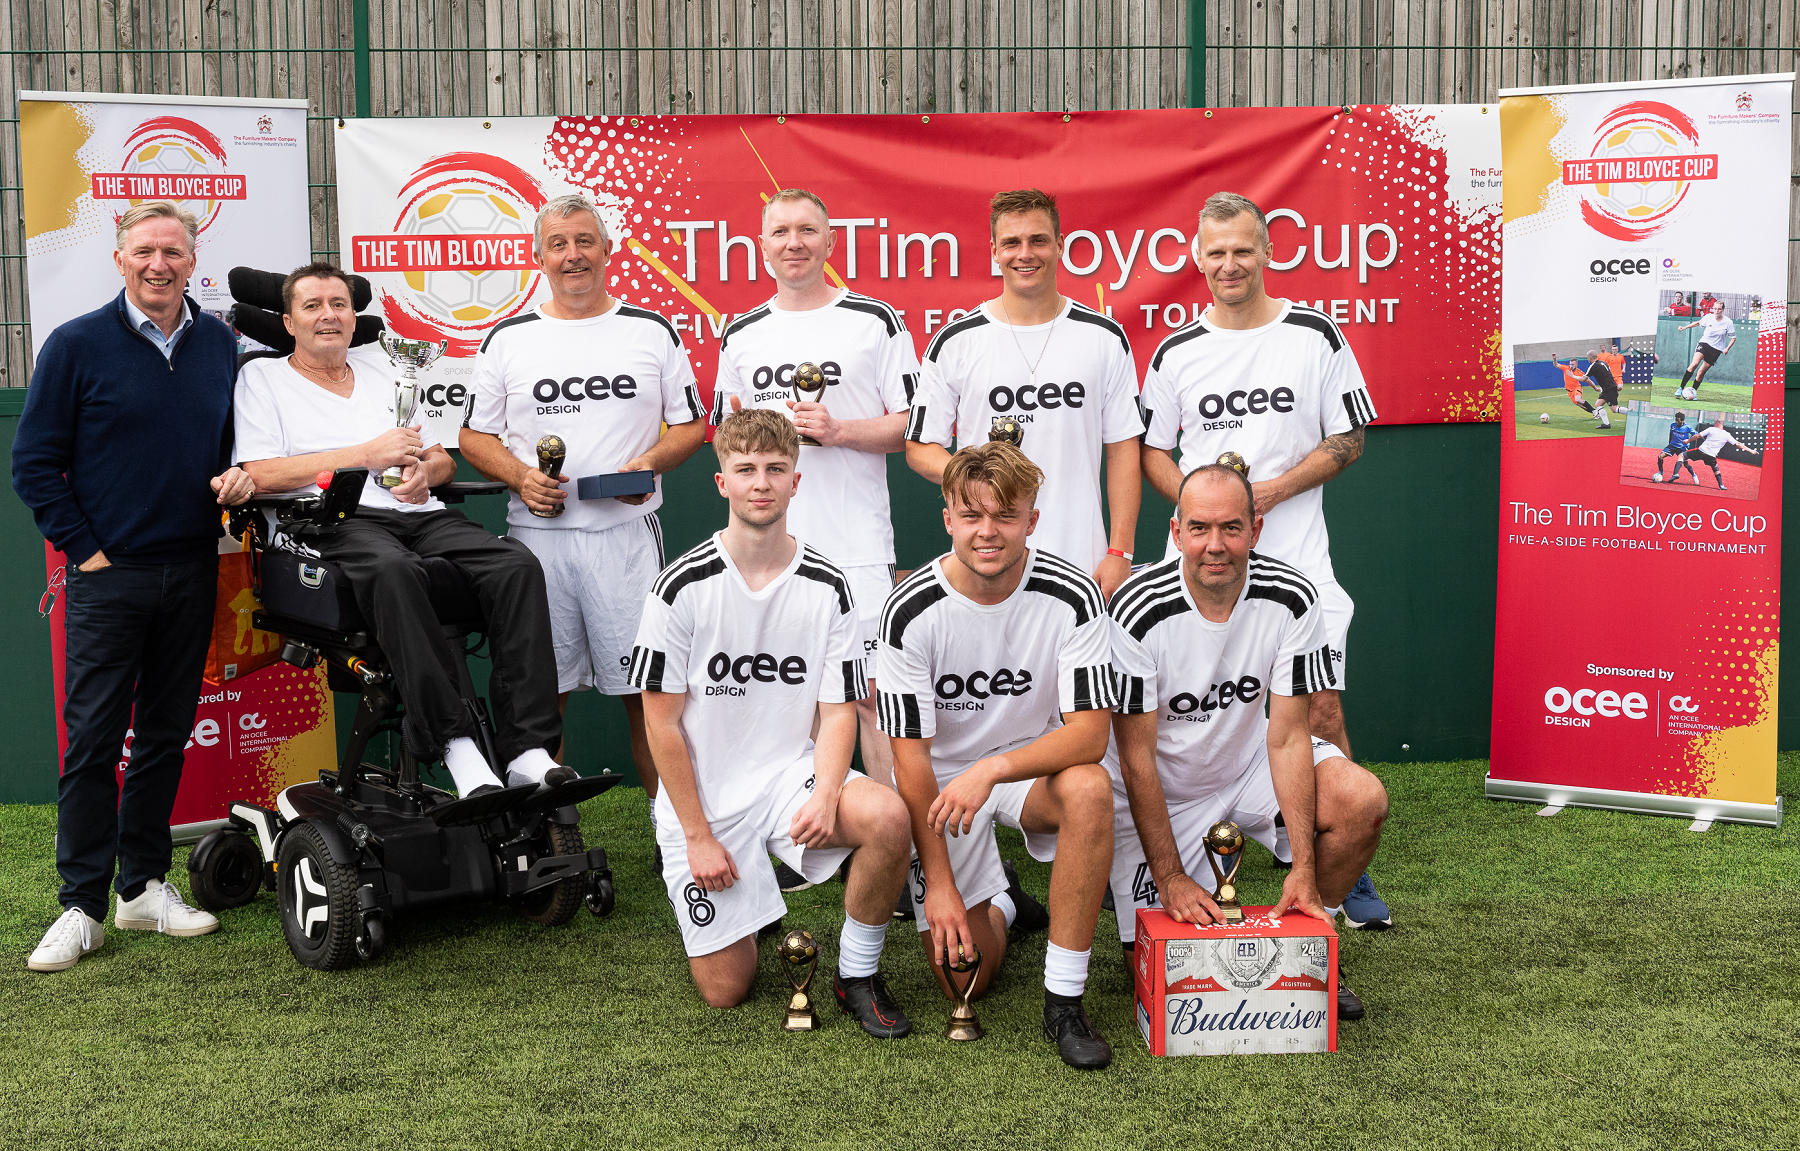 Alistair Gough, CEO of Ocee Design_ Tim Bloyce and the winning team, Ocee United